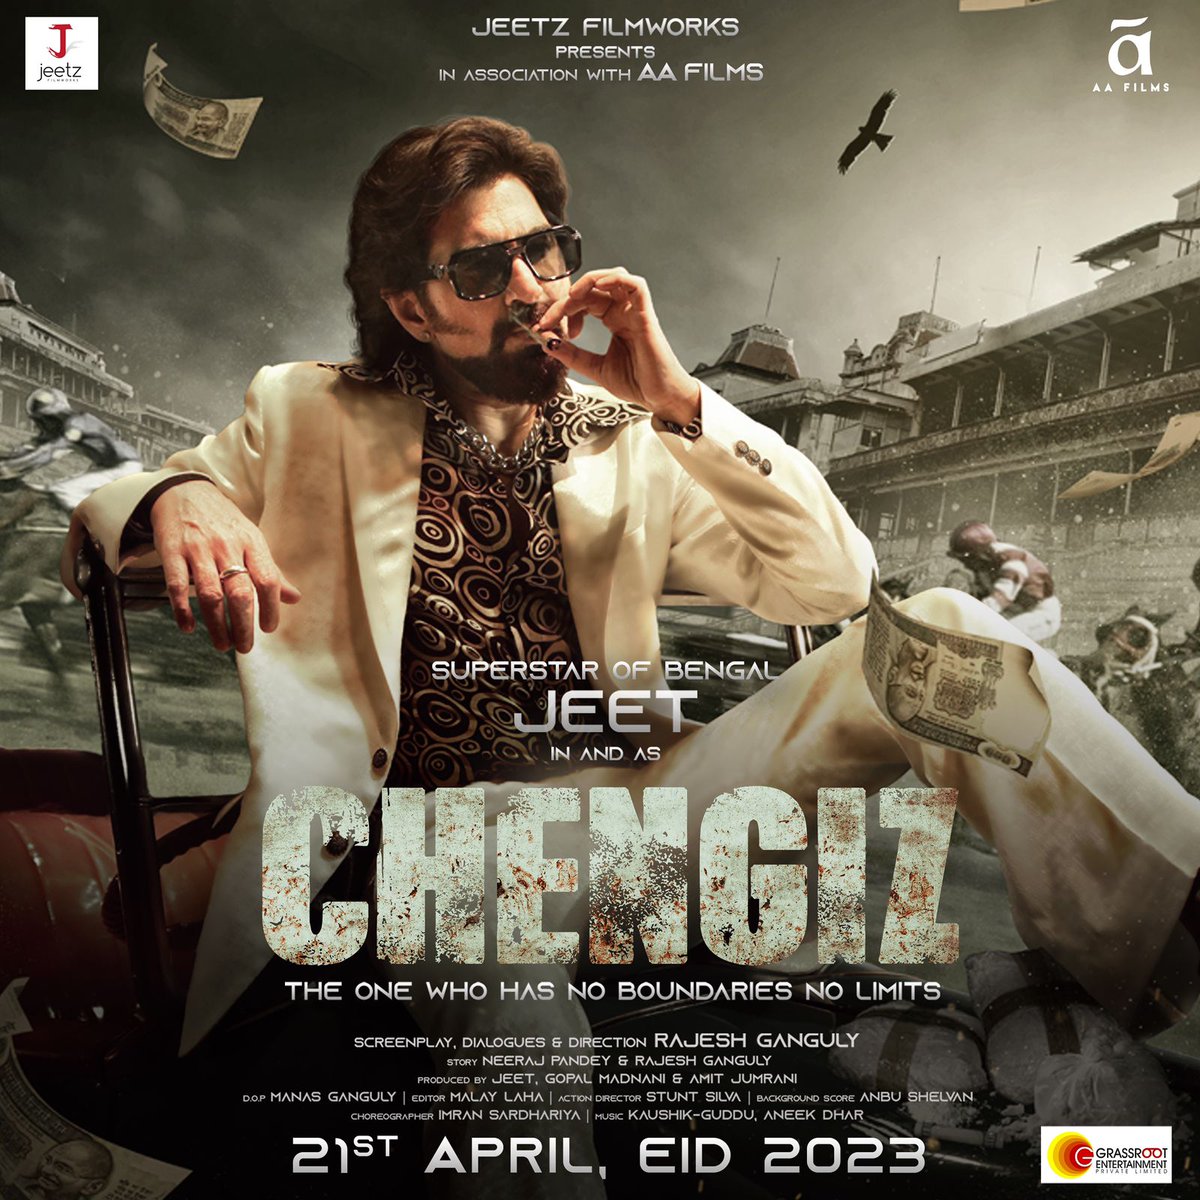 Check out the poster for the highly anticipated #Chengiz starring Bengal’s Superstar Jeet! 💯 It's all set for its grand release this Eid. Get notified when bookings open for it around you: m.paytm.me/chengiz @jeet30 @JeetzFilmworks @GRASSROOTENT @AAFilmsIndia